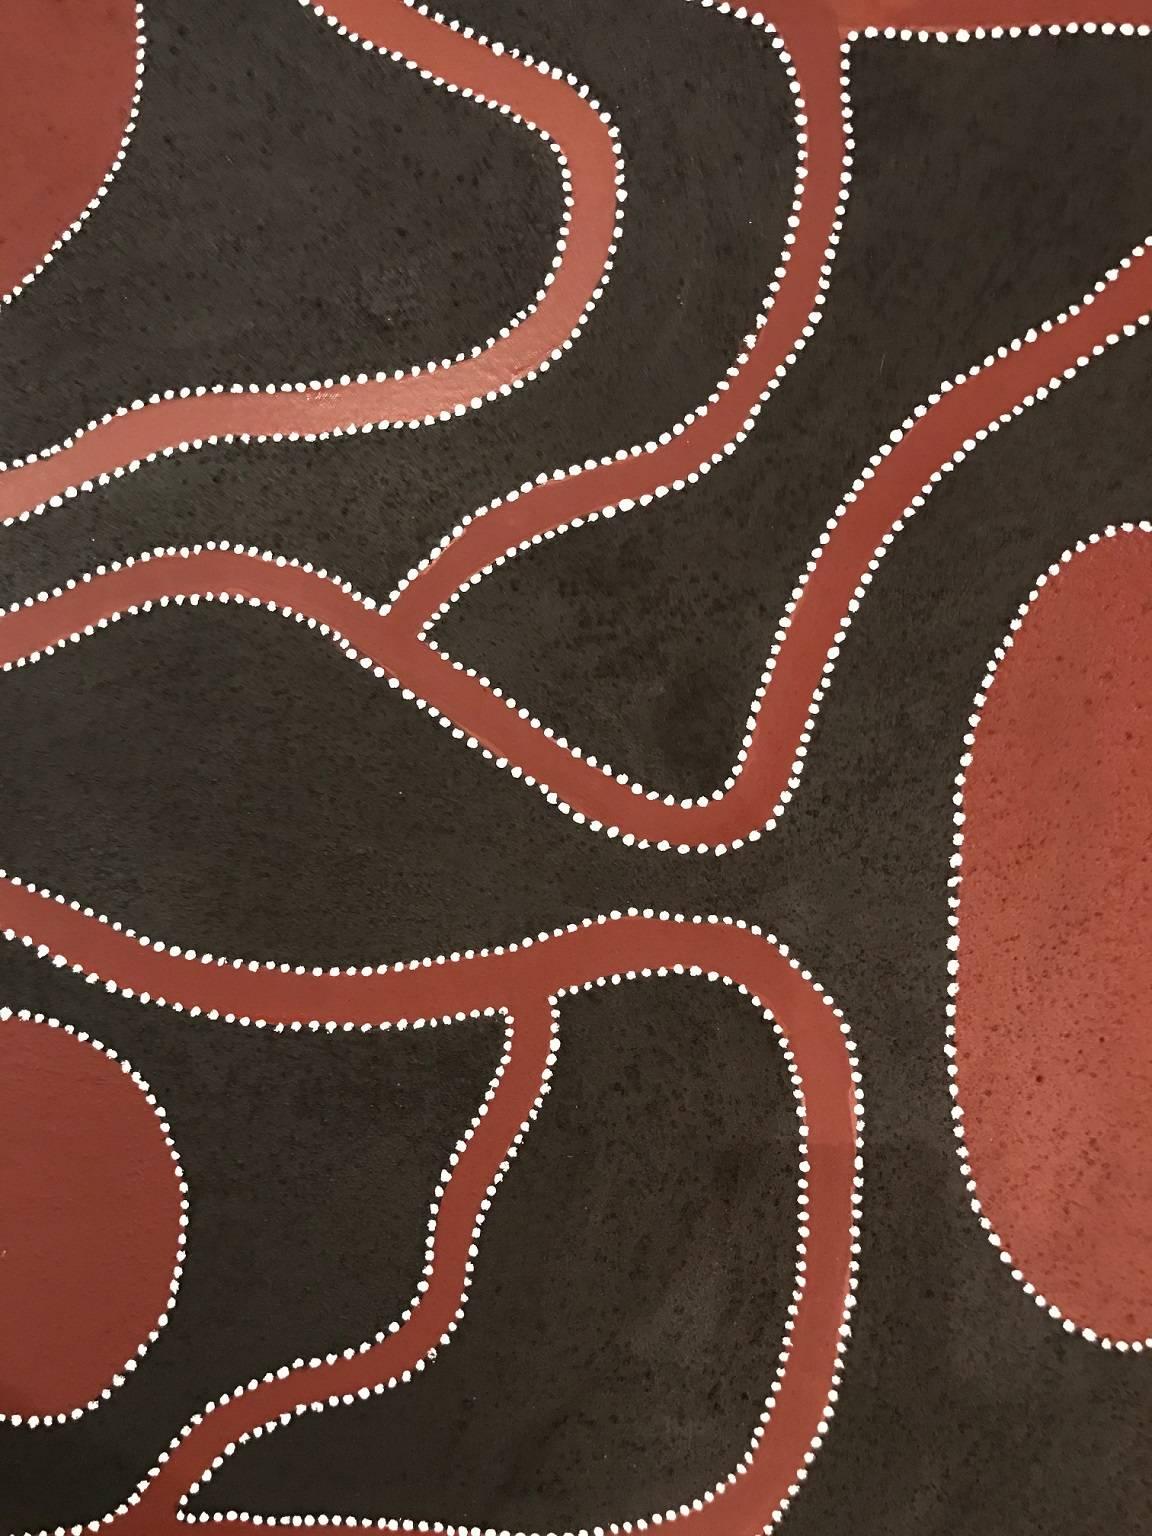 This stunning piece by Tommy Carroll is painted using natural ochres and pigments, taking on a powerful textural form.  This painting tells a story about 'Nuguwarrding' - the rainbow serpent, who travelled and lived in his grandfarther's country in